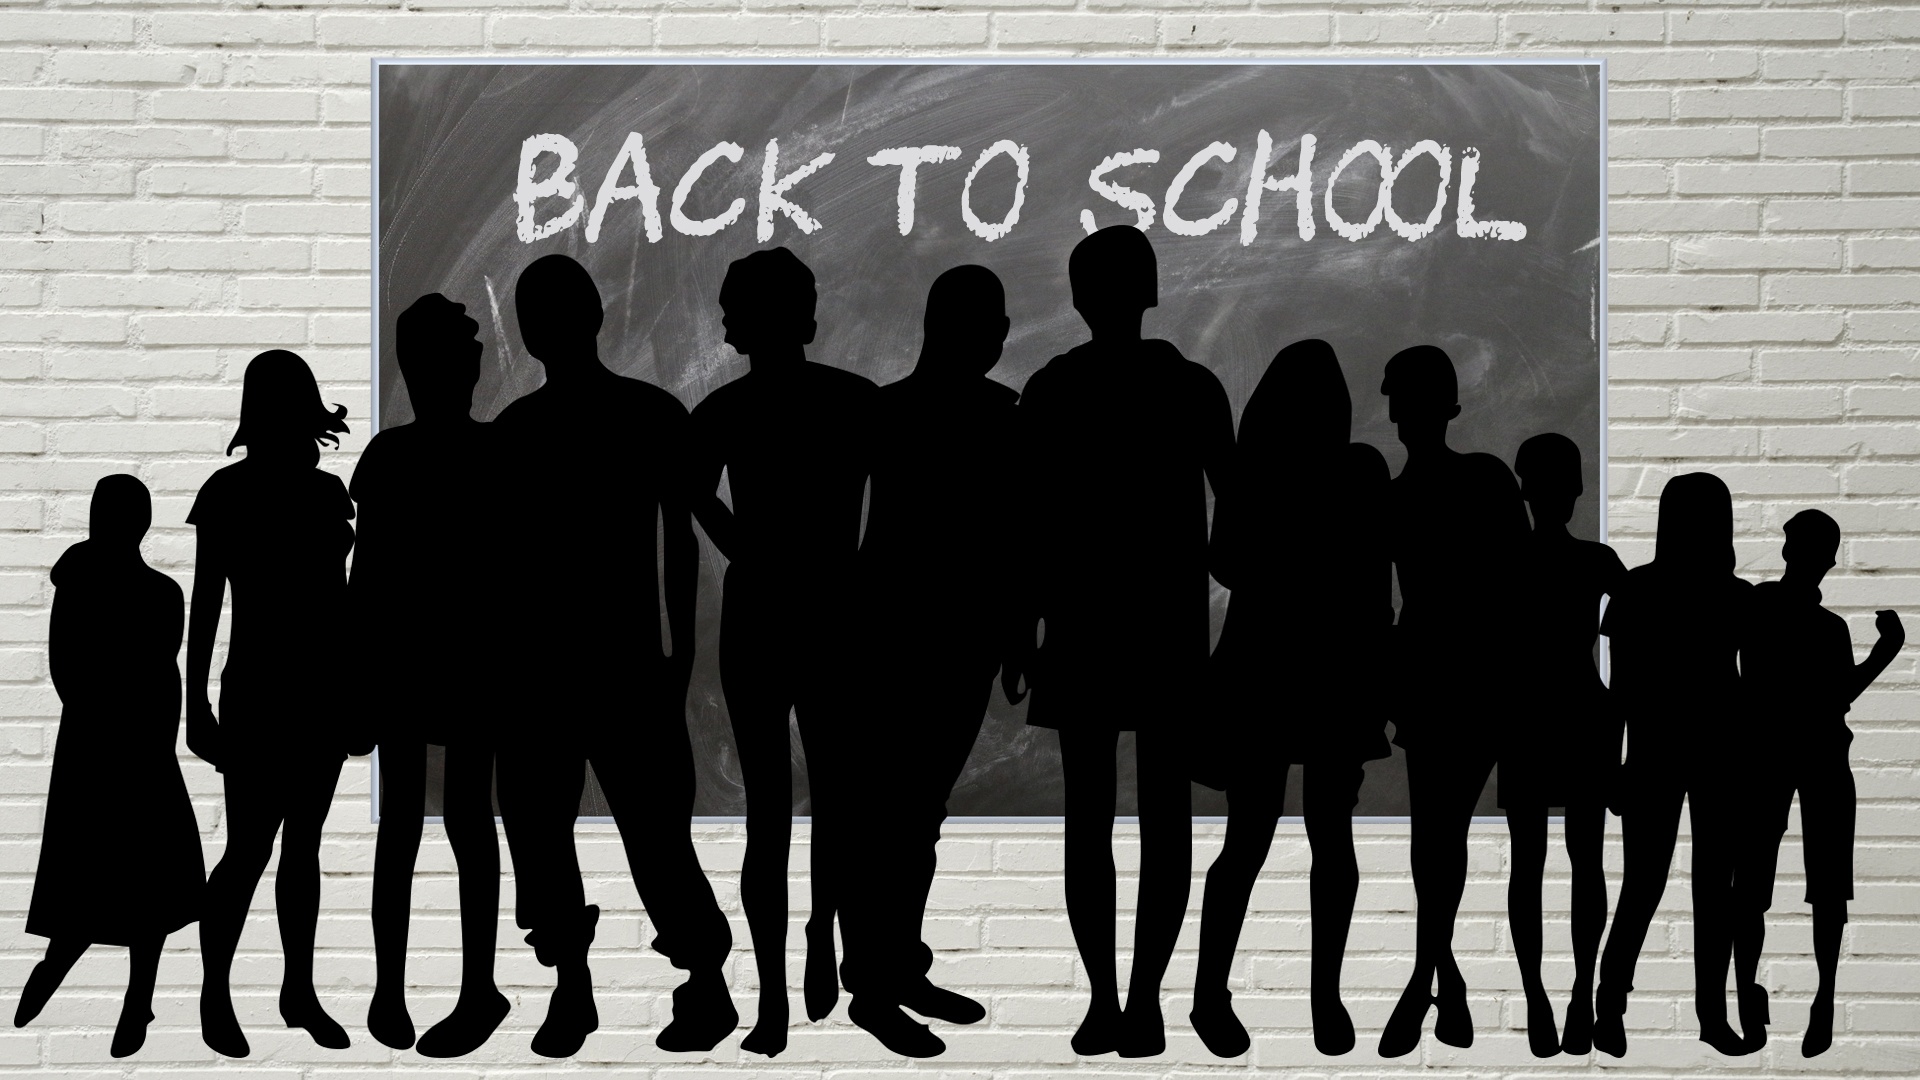 Back to School background with silhouettes of kids. This image is free for download and use on commerical or personal projects